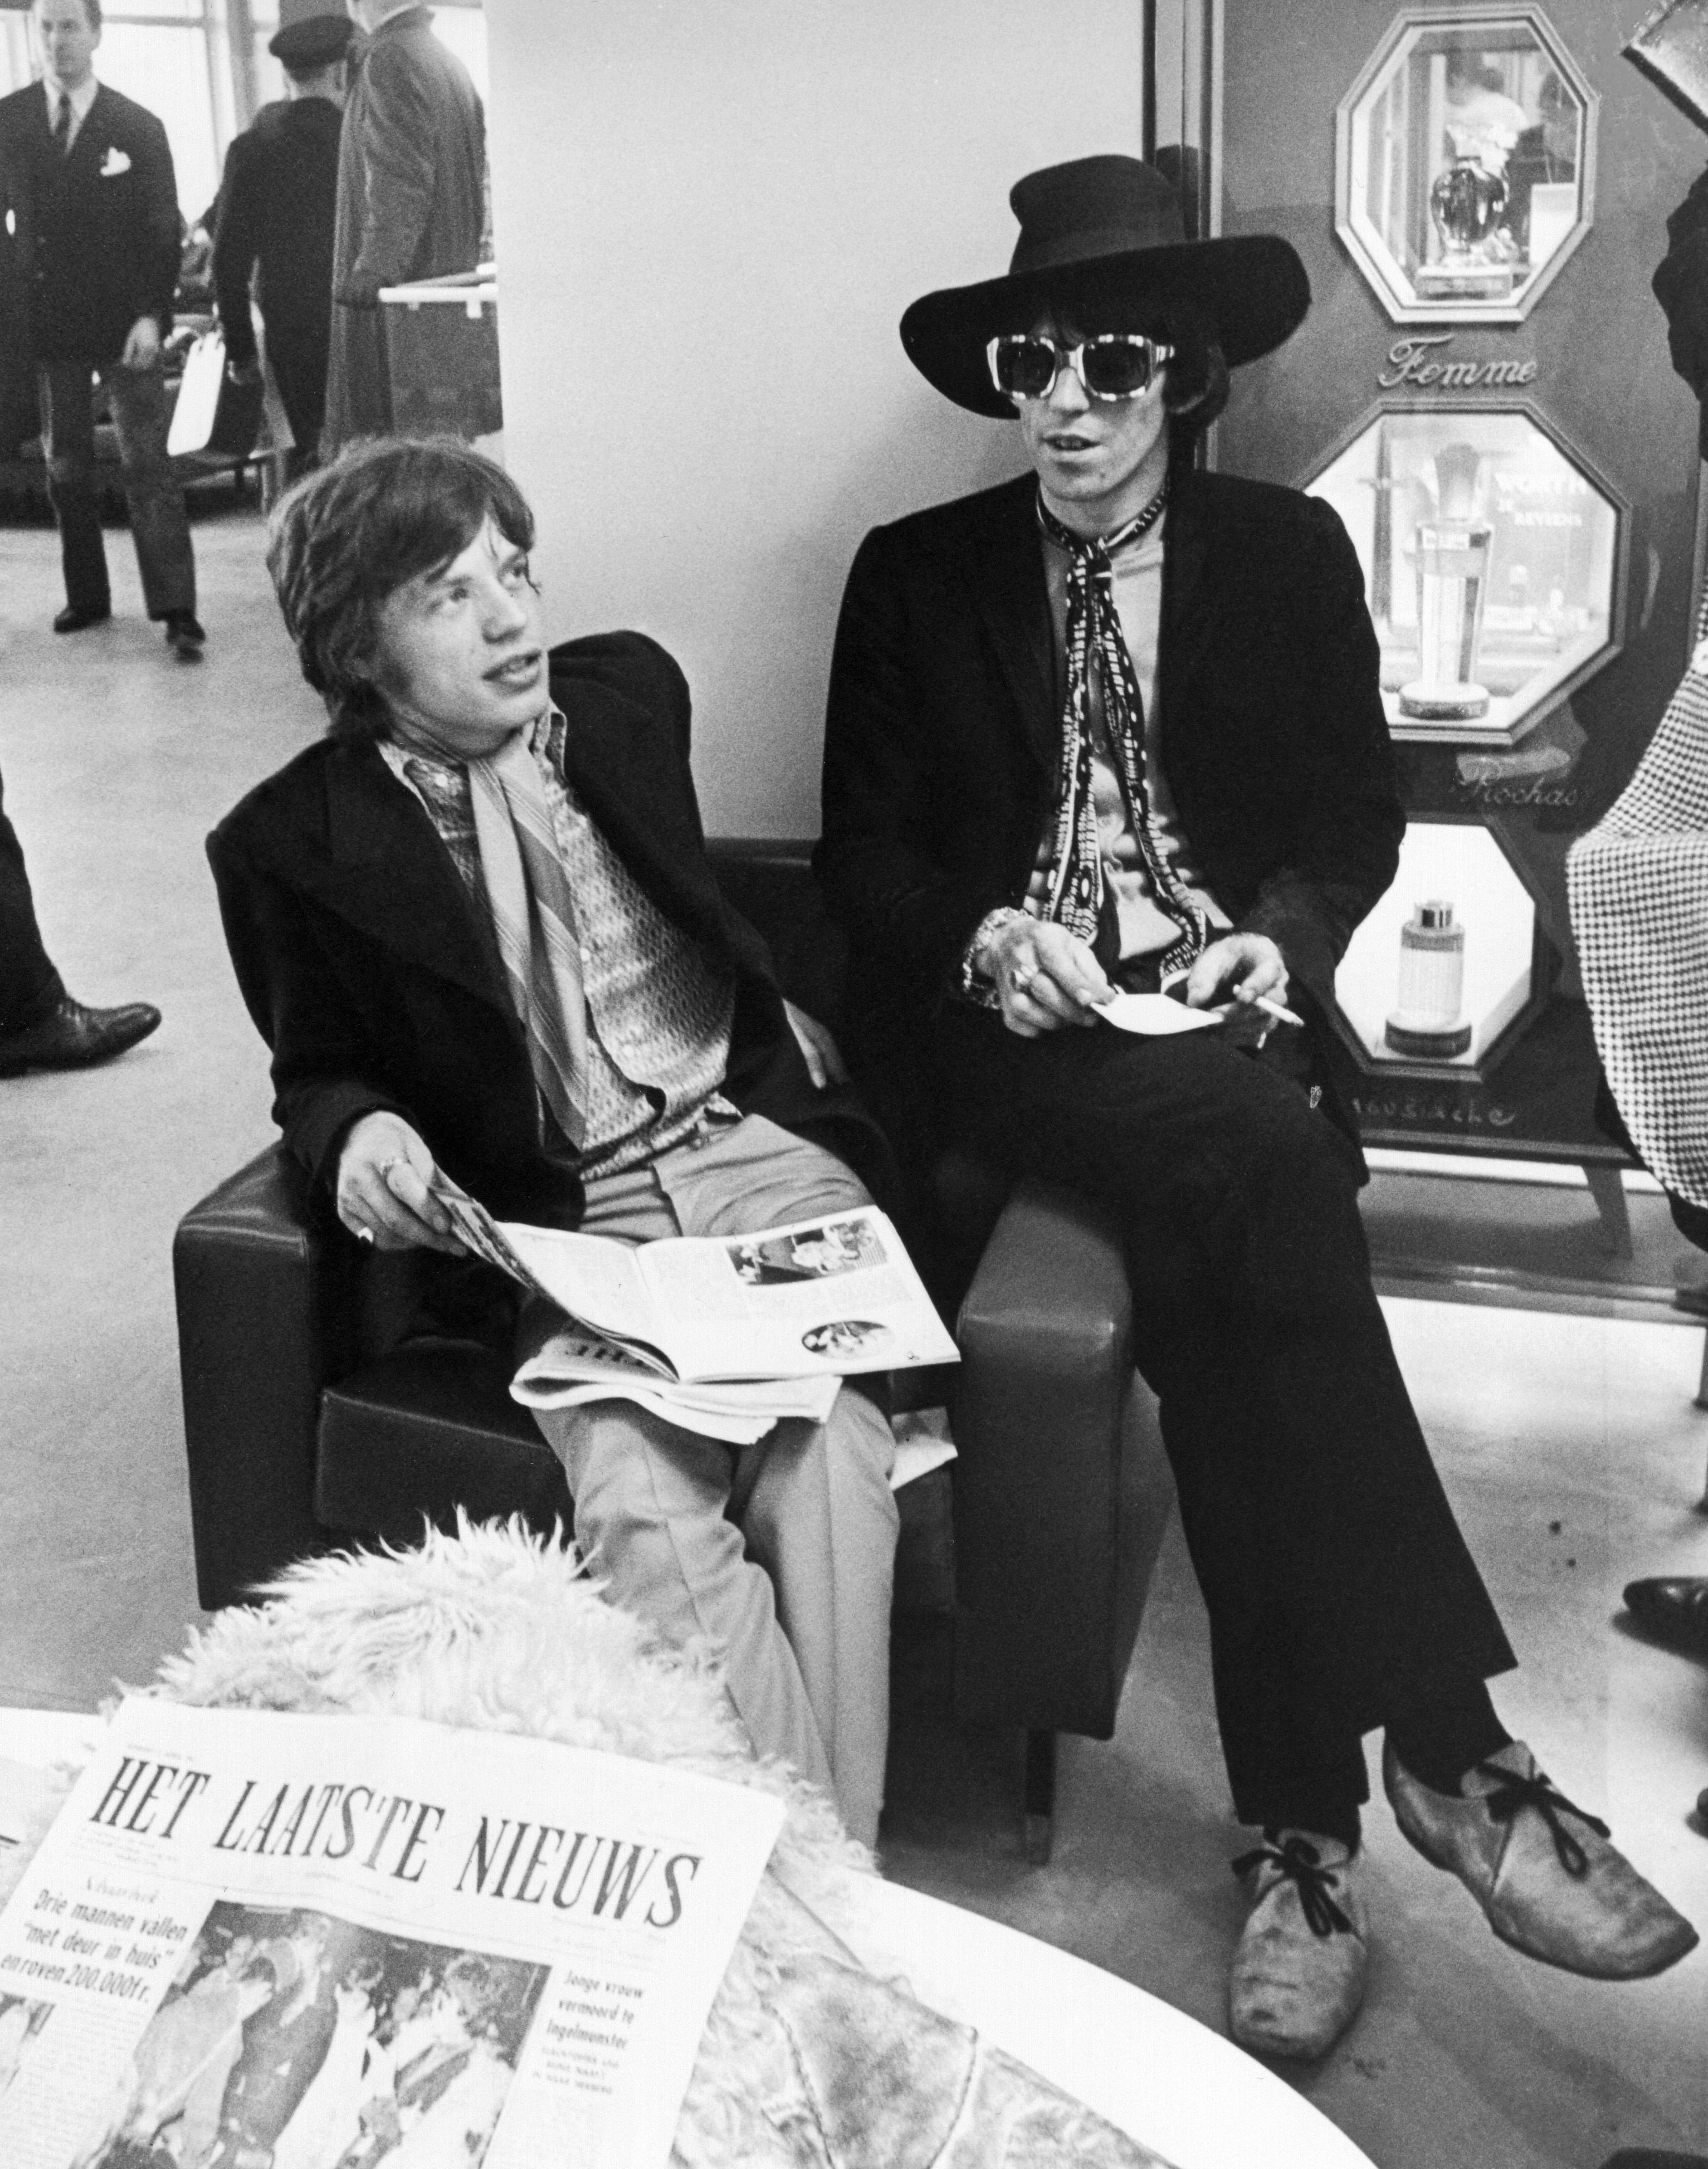 Roy Cummings Black and White Photograph - Mick Jagger and Keith Richards Candid with Newspaper Globe Photos Fine Art Print